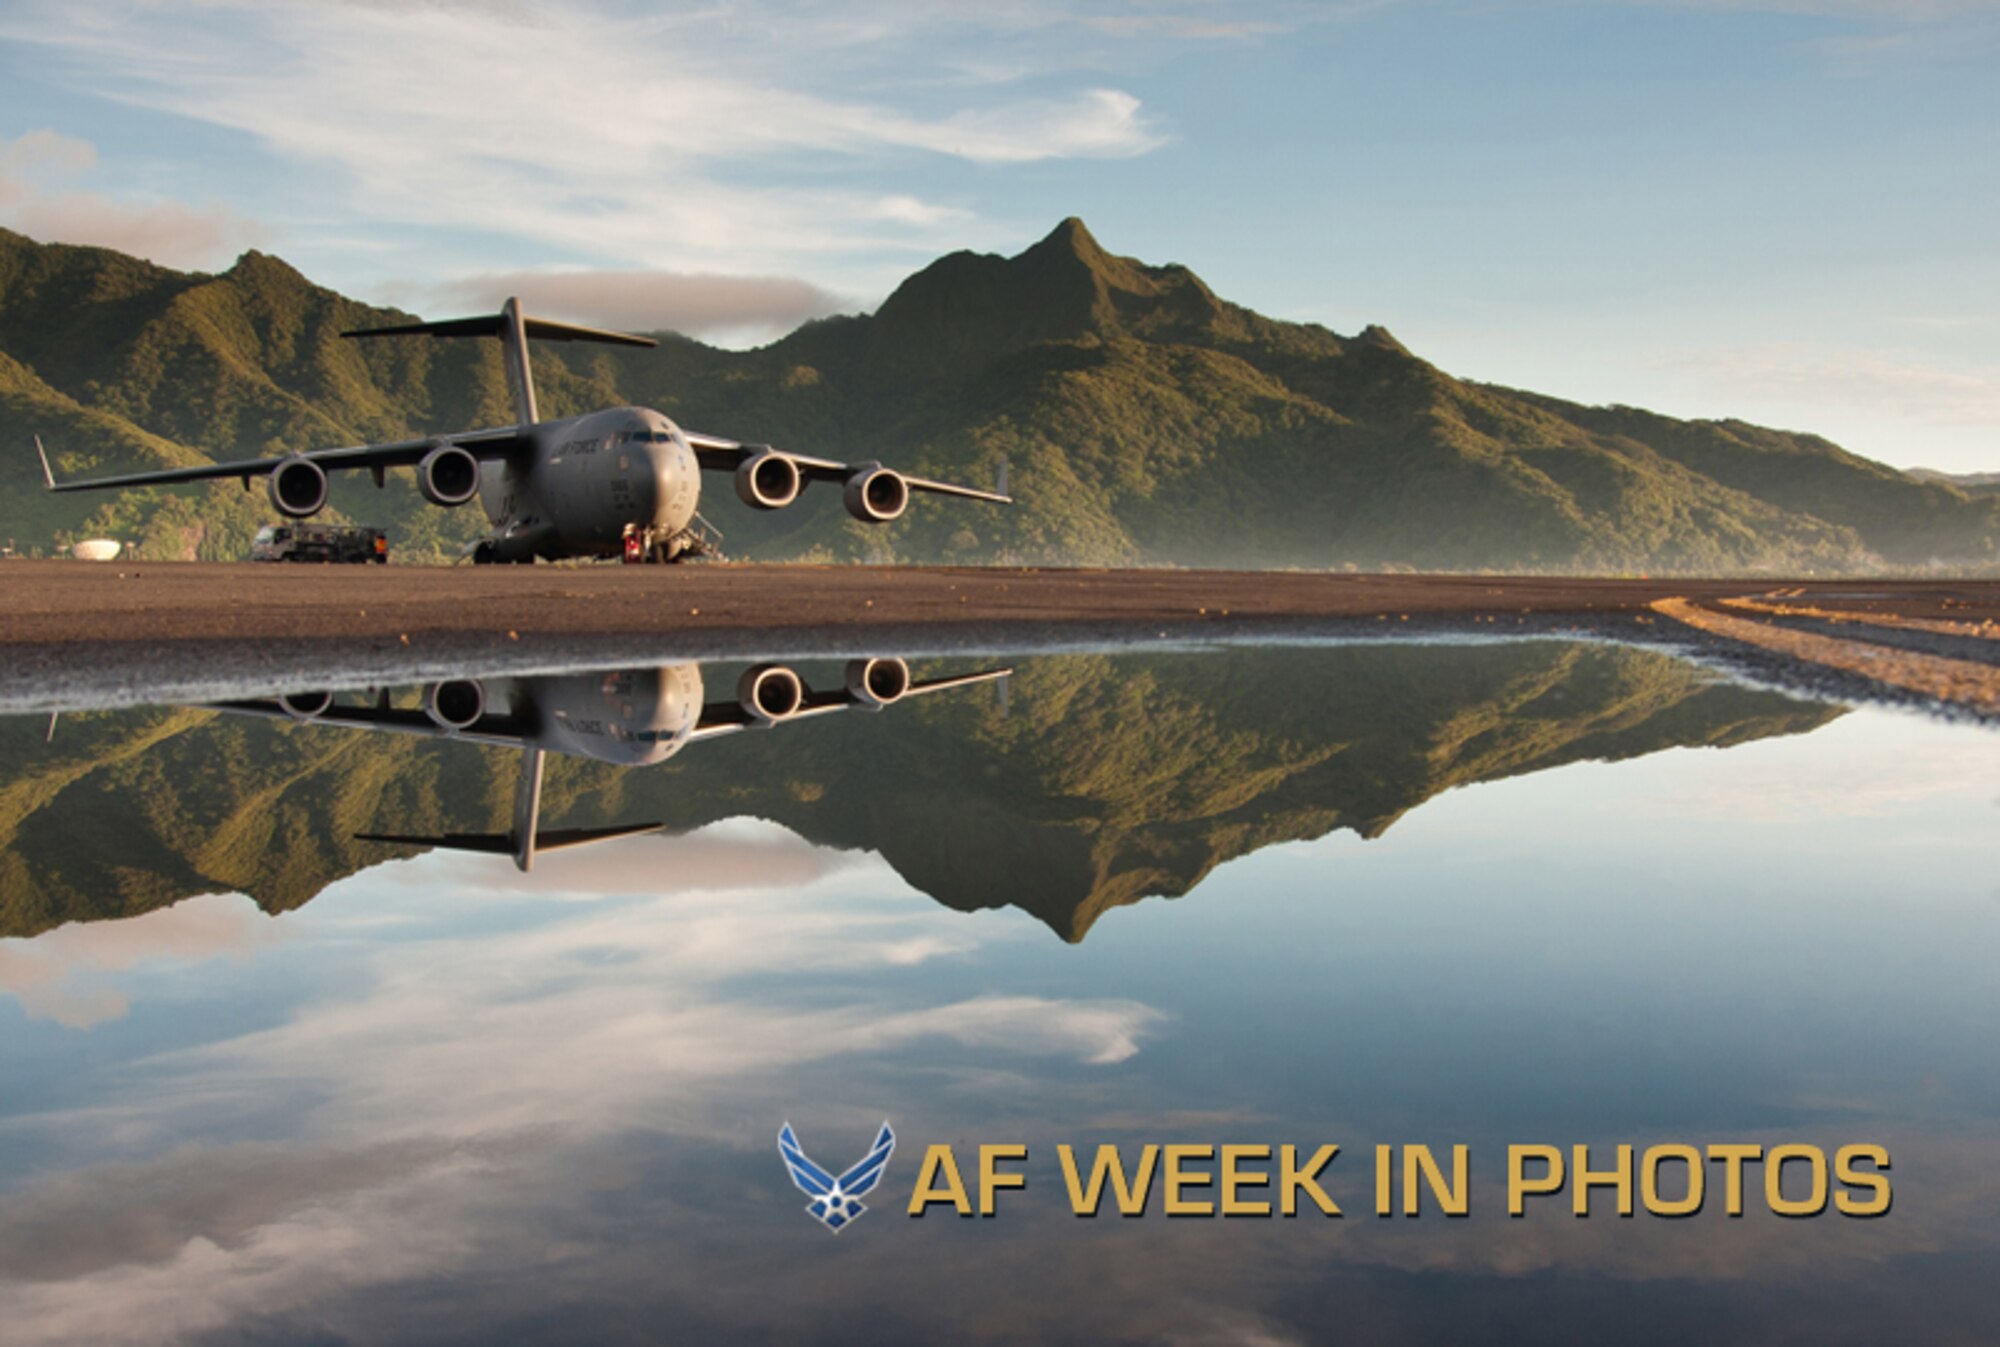 A C-17 Globemaster III sits on the runway at Pago Pago International Airport in American Samoa, Dec. 16, 2012. The 446th Airlift Wing aircrew from Joint Base Lewis-McChord, Wash., traveled to Royal Australian Air Force Base Richmond, Australia, in support of a joint operation. Tropical Cyclone Evan passed over American Samoa Dec. 12 -16 causing 6,000 people to take shelter in evacuation centers and $4.1 million in damages to infrastructure. The puddle in the foreground is a result of the rains from that storm system. (U.S. Air Force photo/Staff Sgt. Jon Polka)
